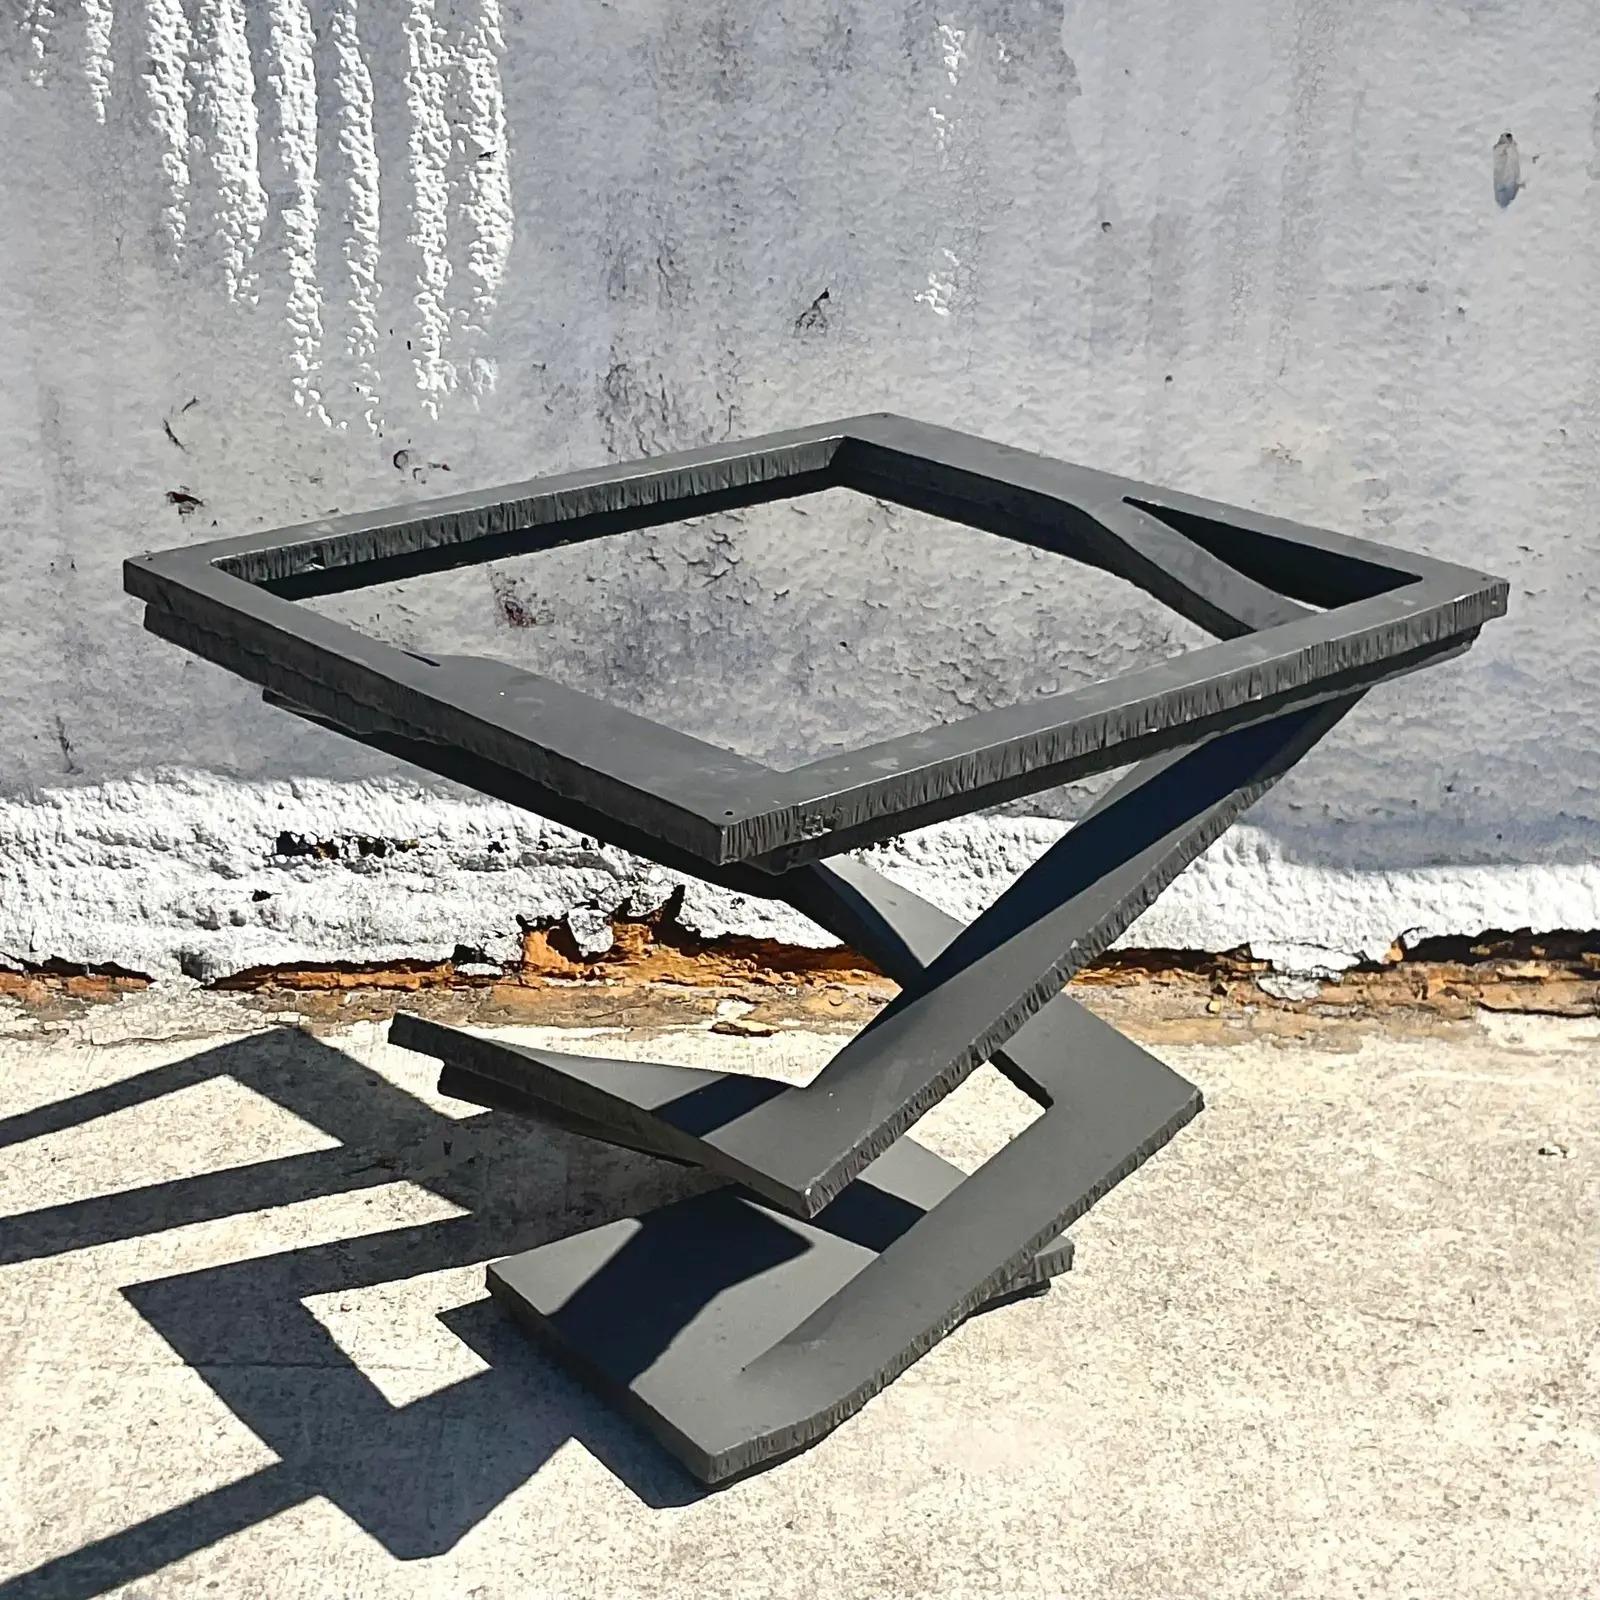 A fantastic vintage contemporary dining table pedestal. Made by the iconic Roche Bobois group in Italy. Part of their “Fleur De Fer” collection. Designed by Maurice Barilone. Torch cut steel and wrought iron. Acquired from a Palm Beach estate.